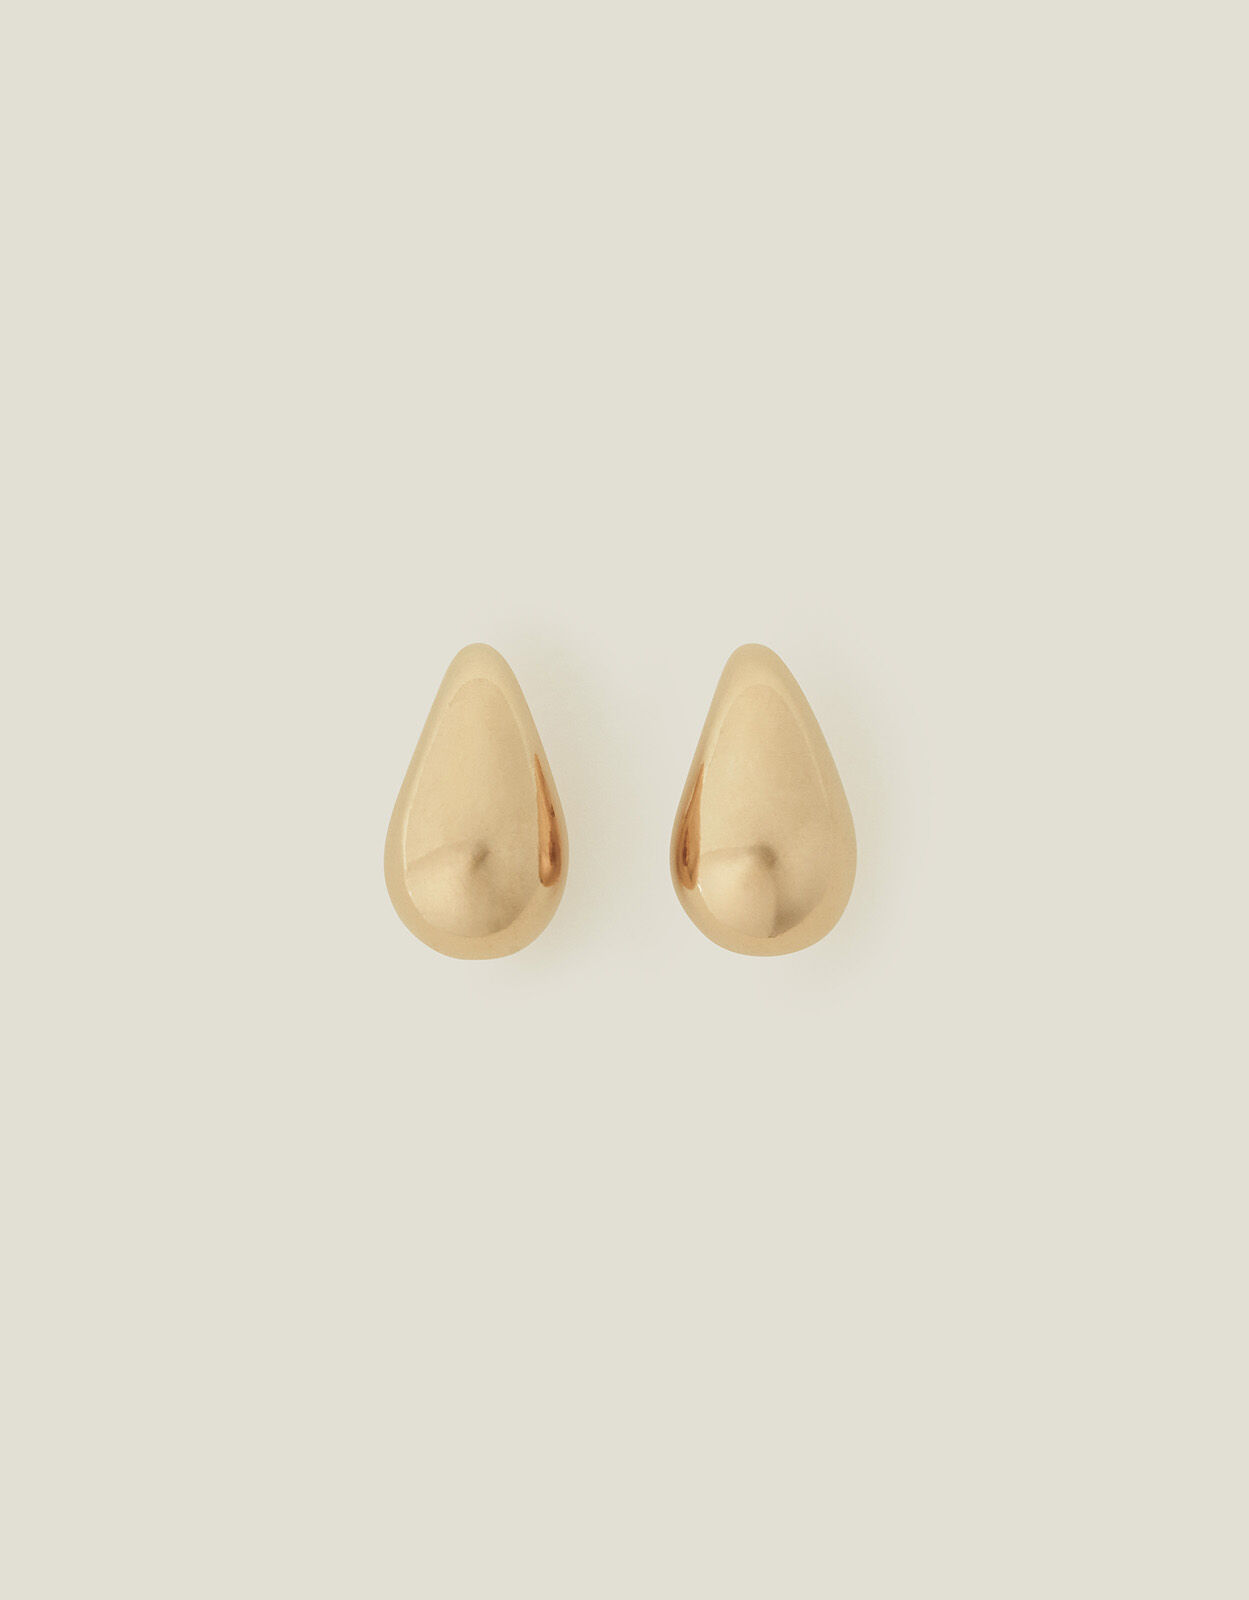 14ct Gold-Plated Tear Drop Earrings | Z for Accessorize